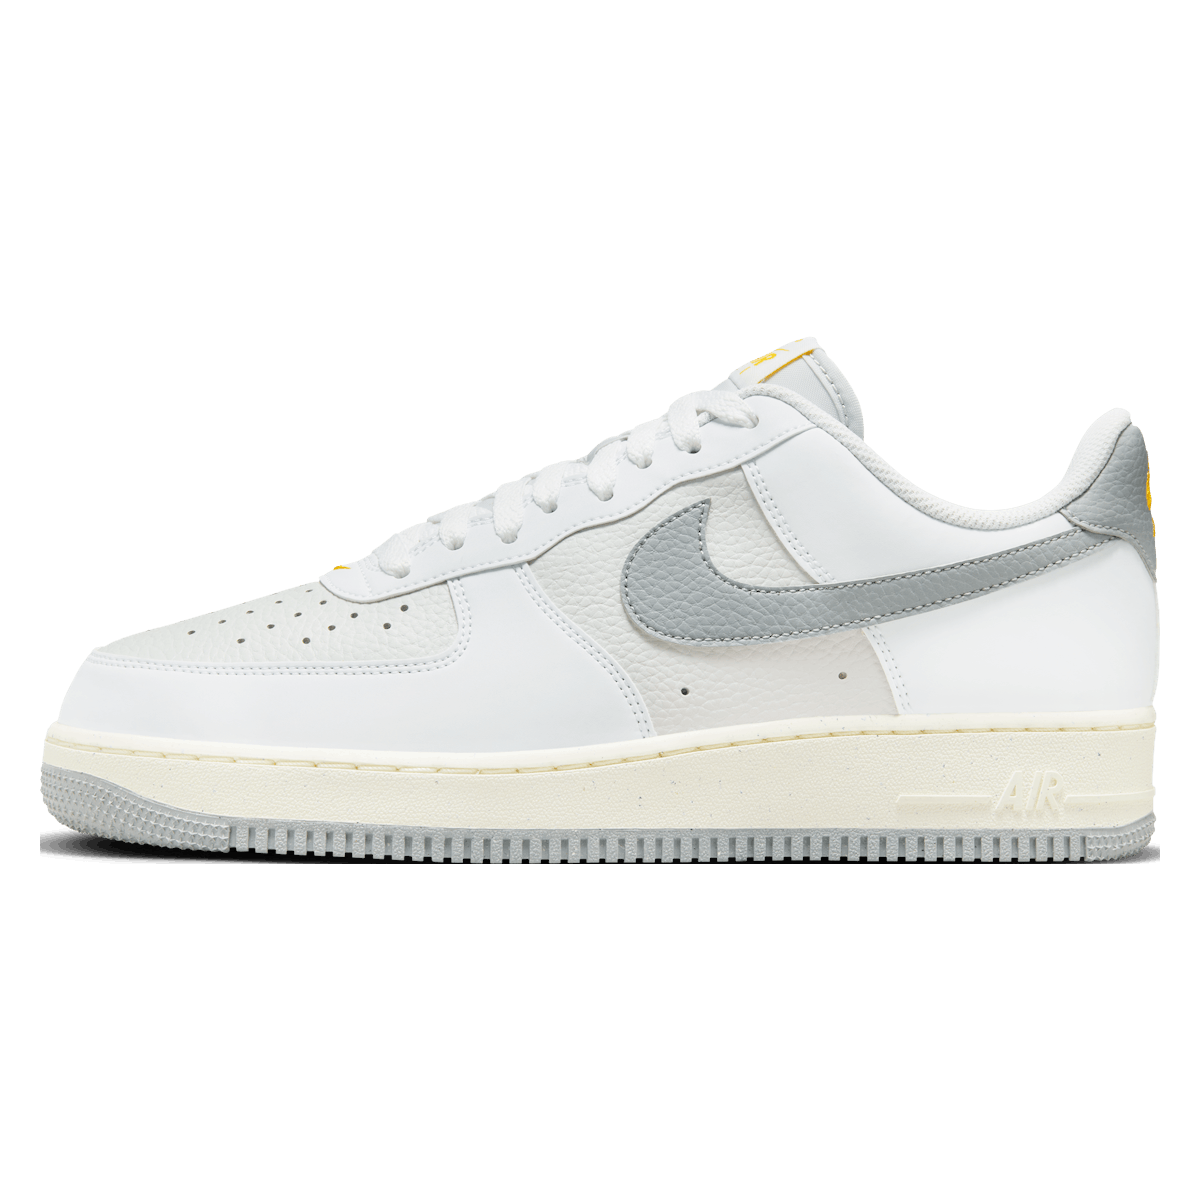 Nike Air Force 1 '07 Next Nature "Photon Dust"